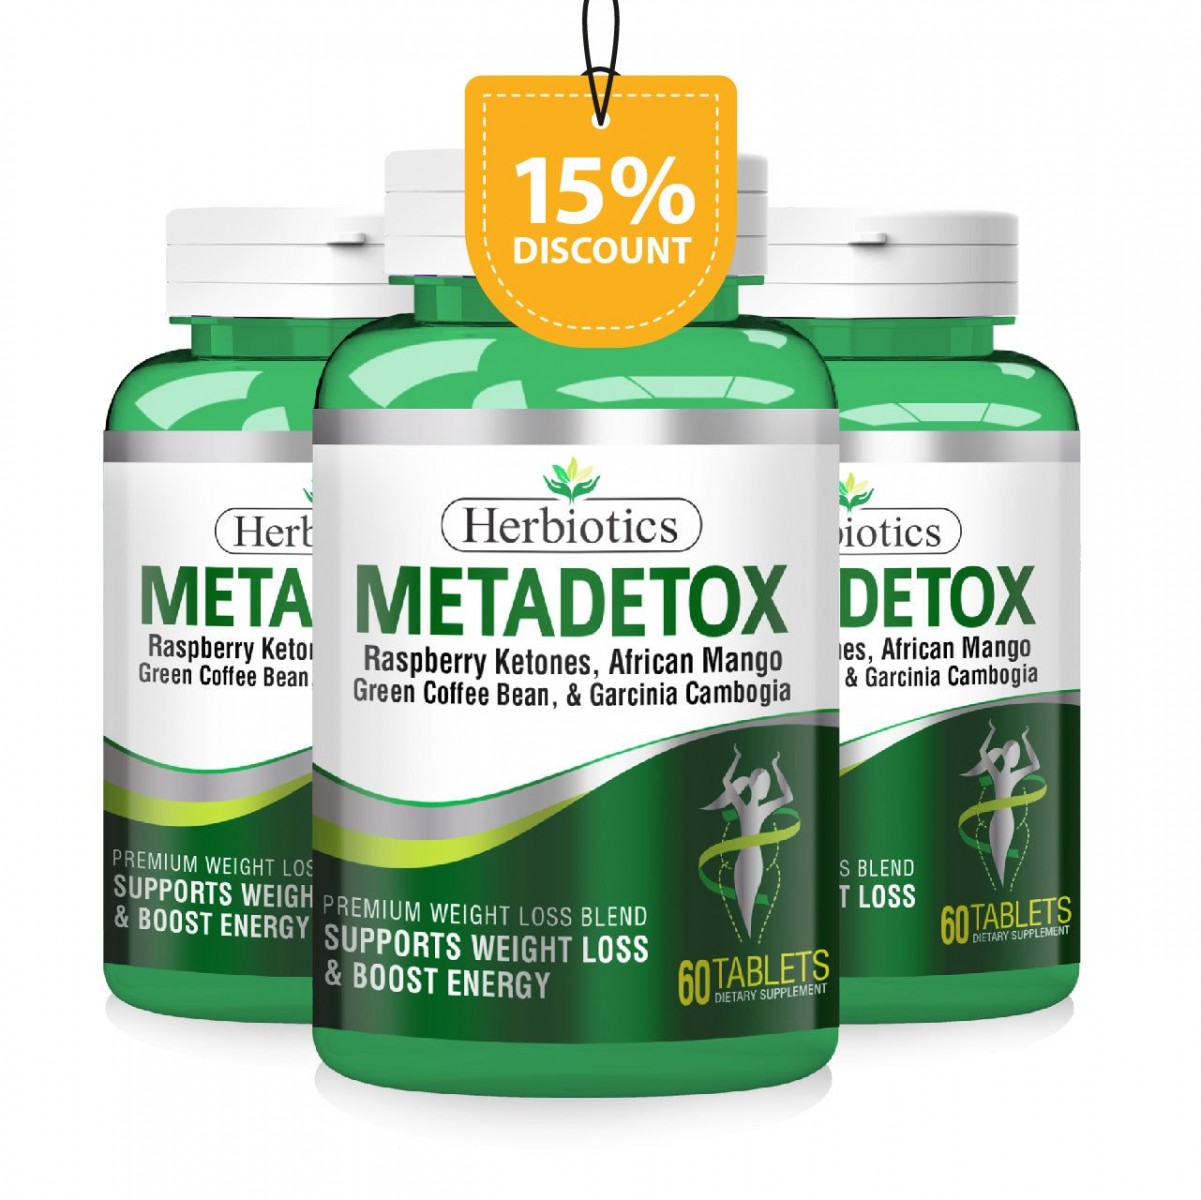 metadetox for weight loss